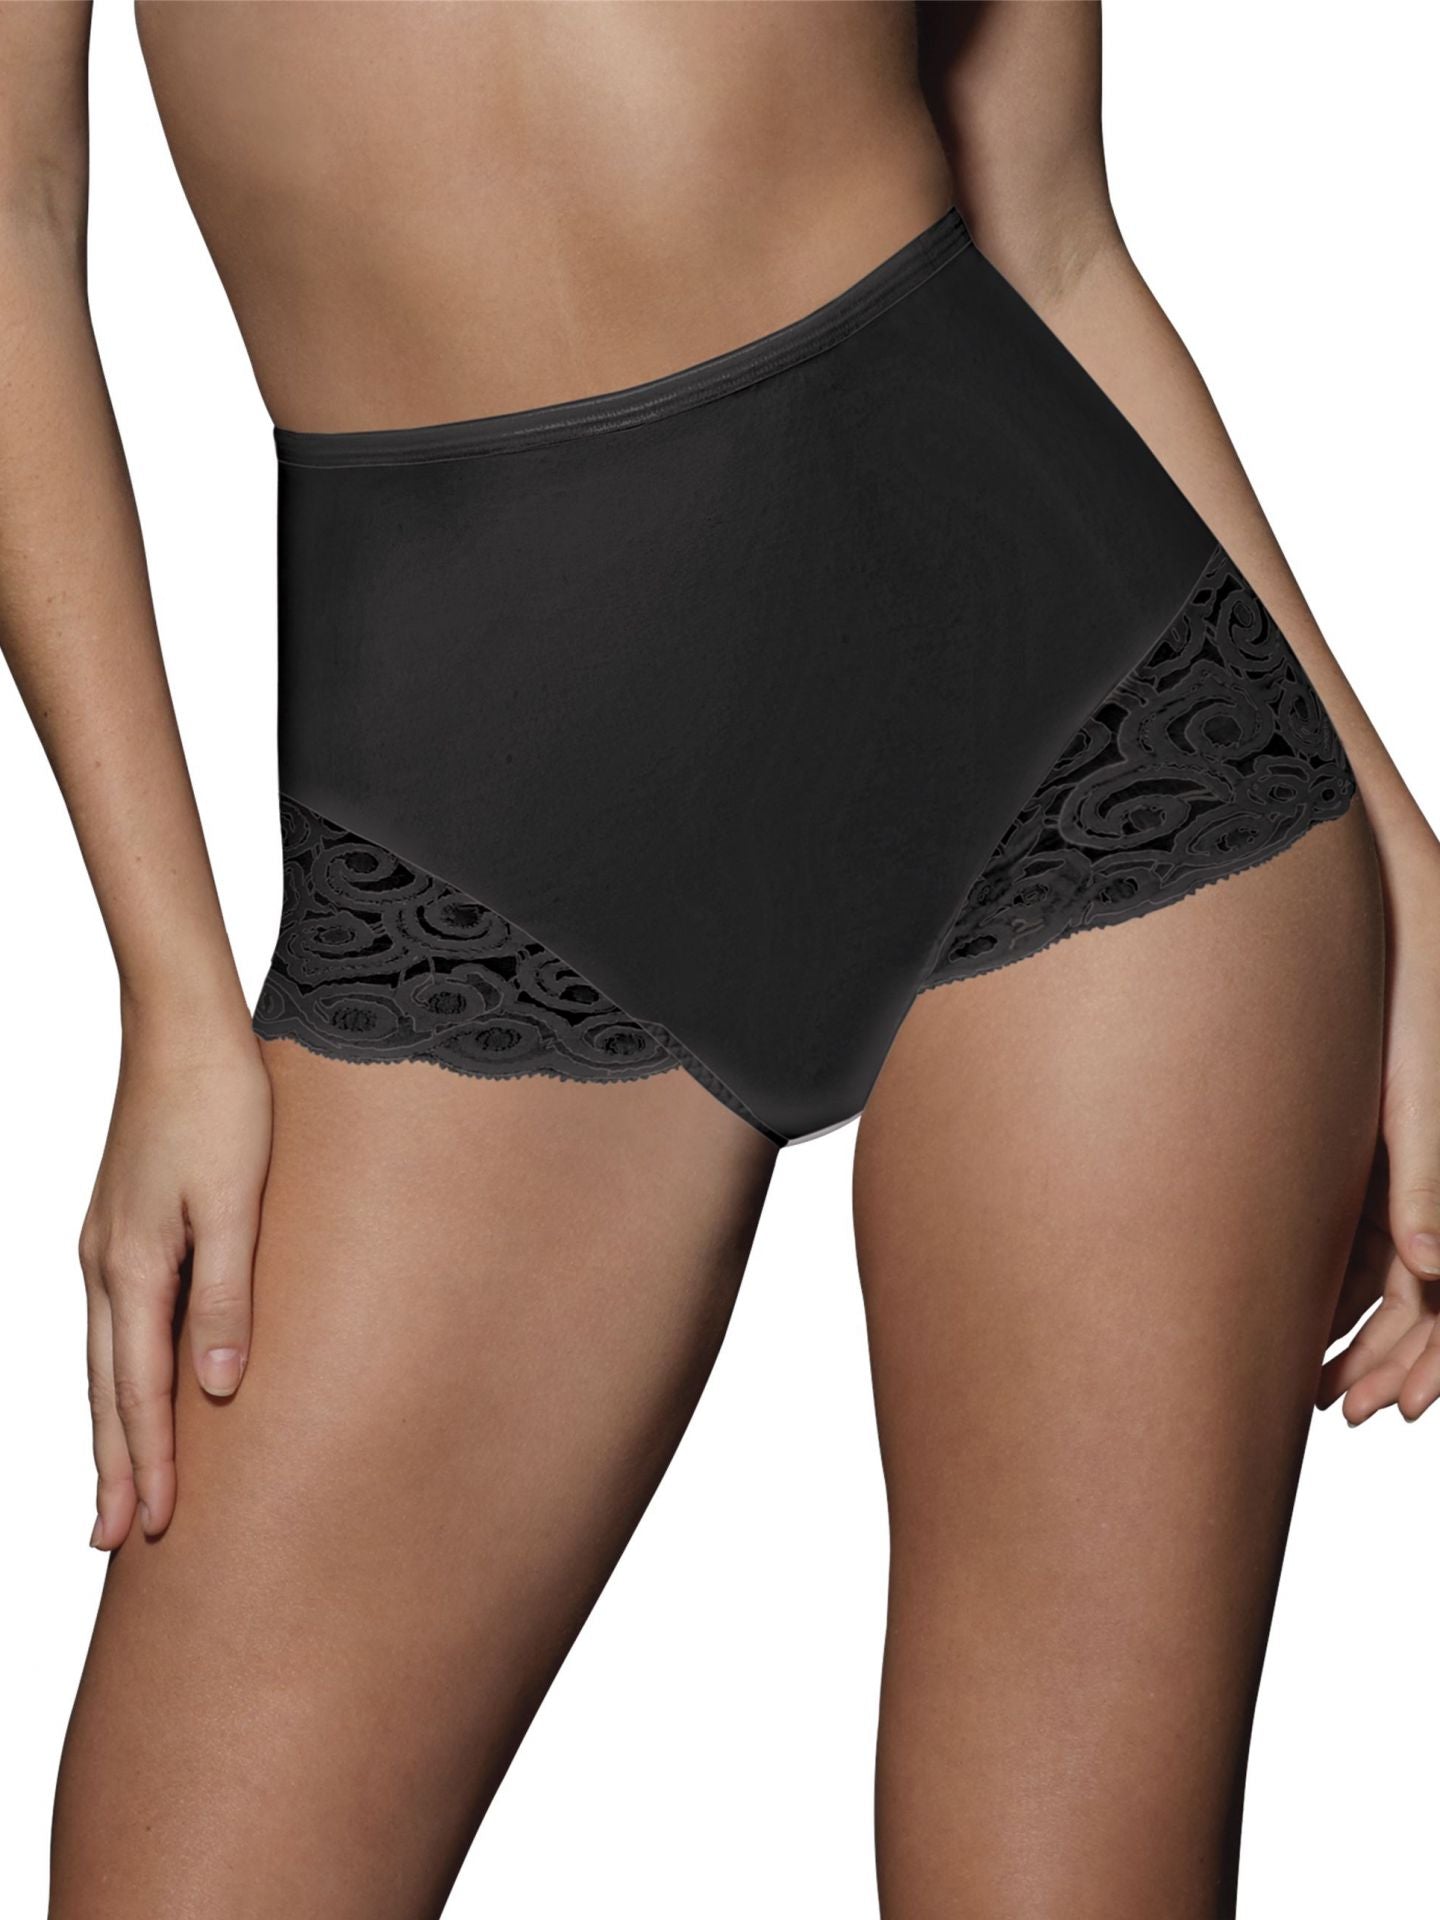 Women's Firm Control Lace Brief - 2 Pack